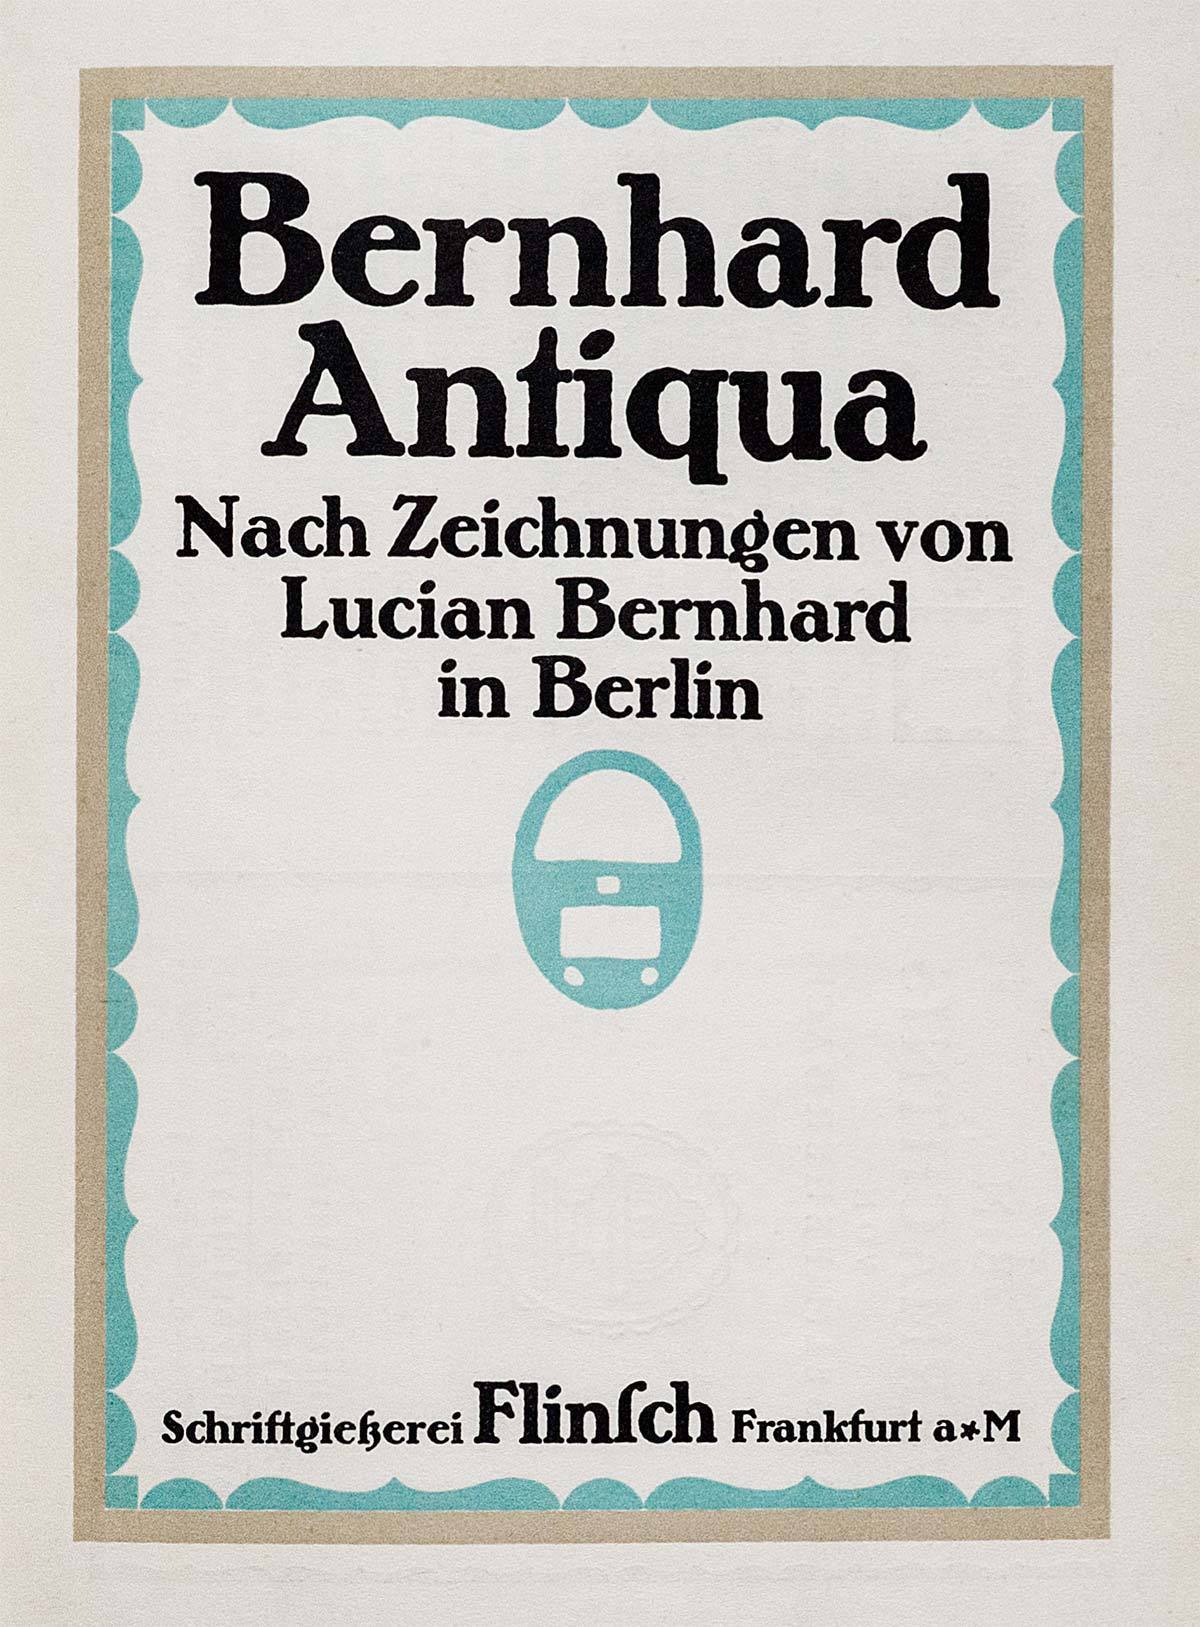 Lucian Bernhard’s Bernhard Antiqua (released with the Flinsch type foundry in 1911) announced in Klimschs Jahrbuch, vol. 12, Frankfurt/Main 1912. (With kind permission from the collection of Erik Spiekermann.)